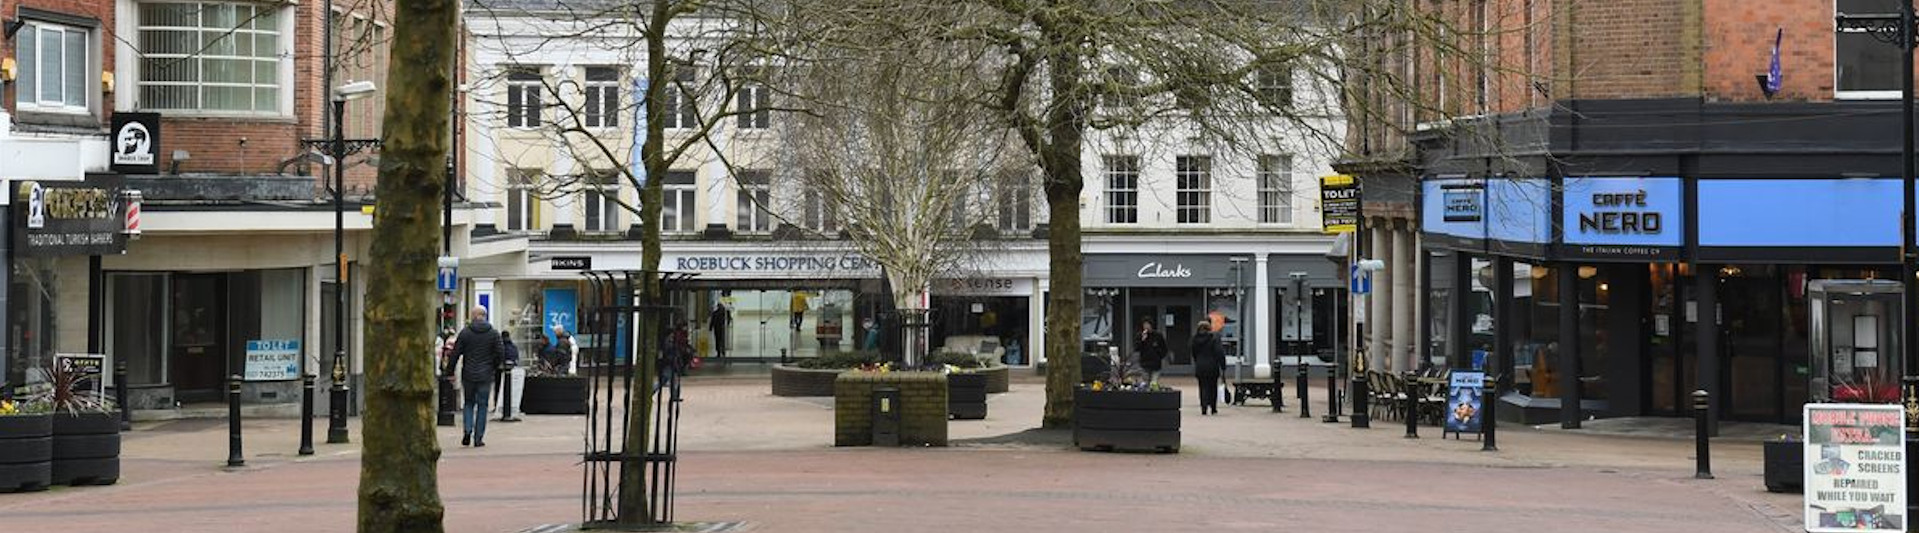 Newcastle Under Lyme Town Center showing Roebuck shopping center and Cafe Nero